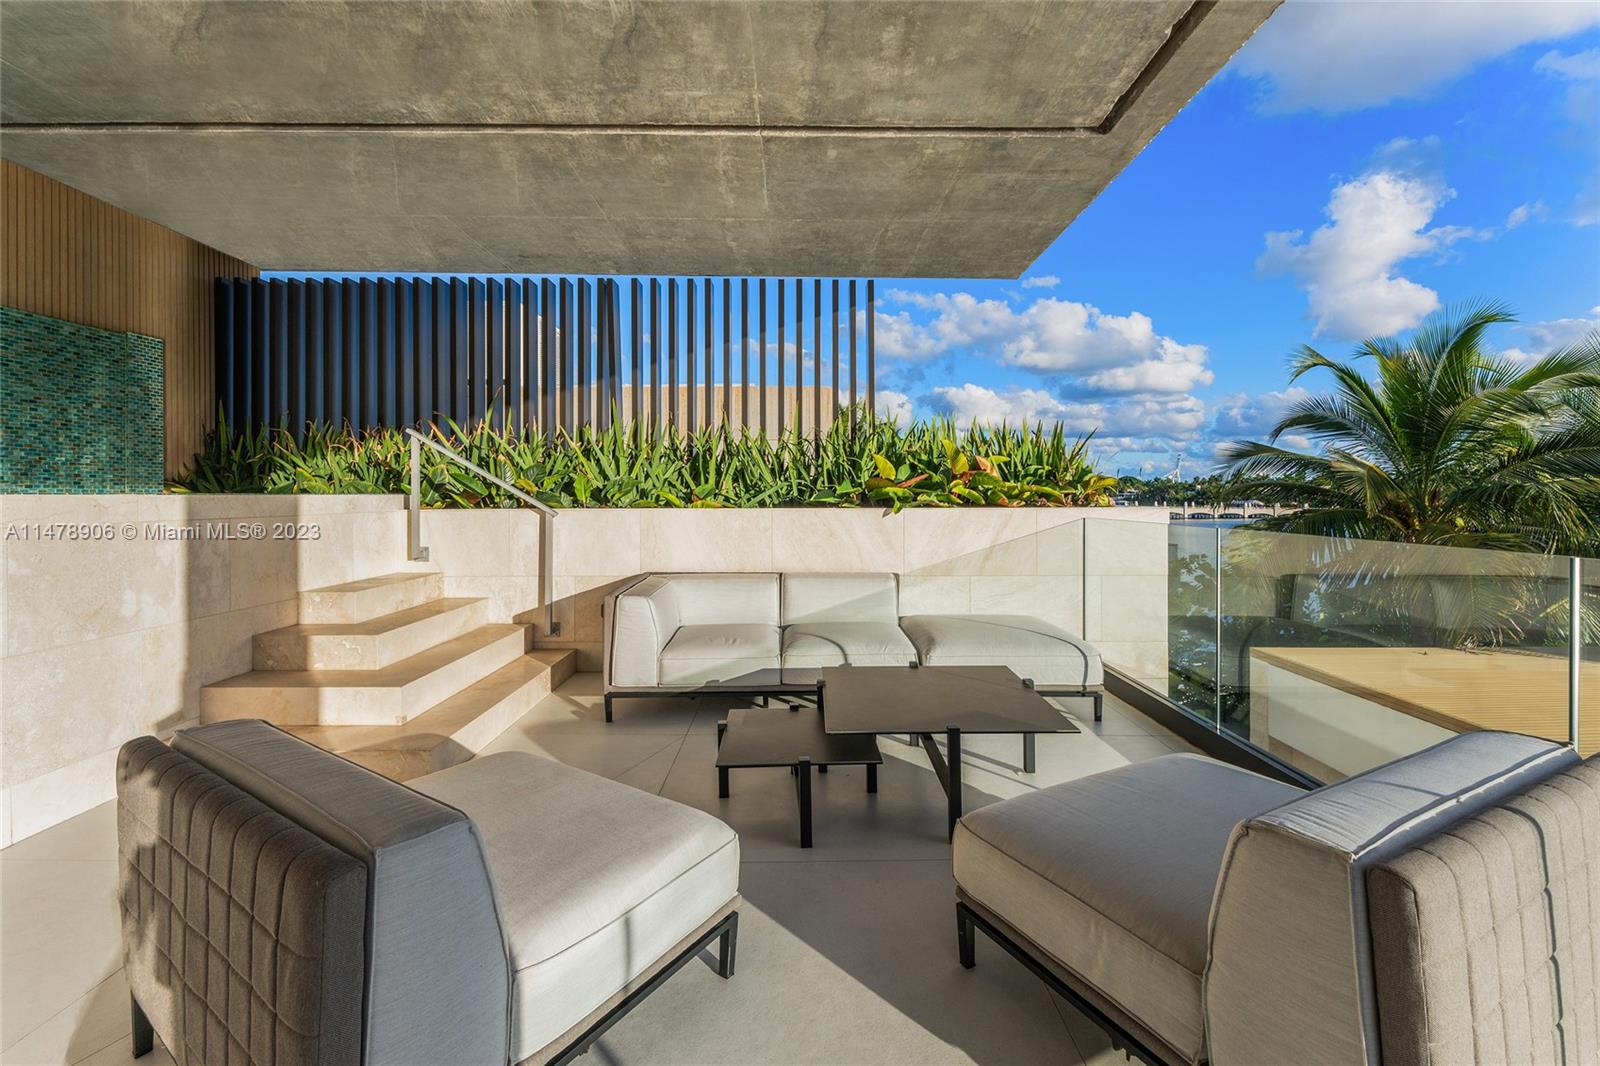 320 S Hibiscus Dr, Miami Beach, Florida, 33139, United States, 7 Bedrooms Bedrooms, ,8 BathroomsBathrooms,Residential,For Sale,320 S Hibiscus Dr,1395276